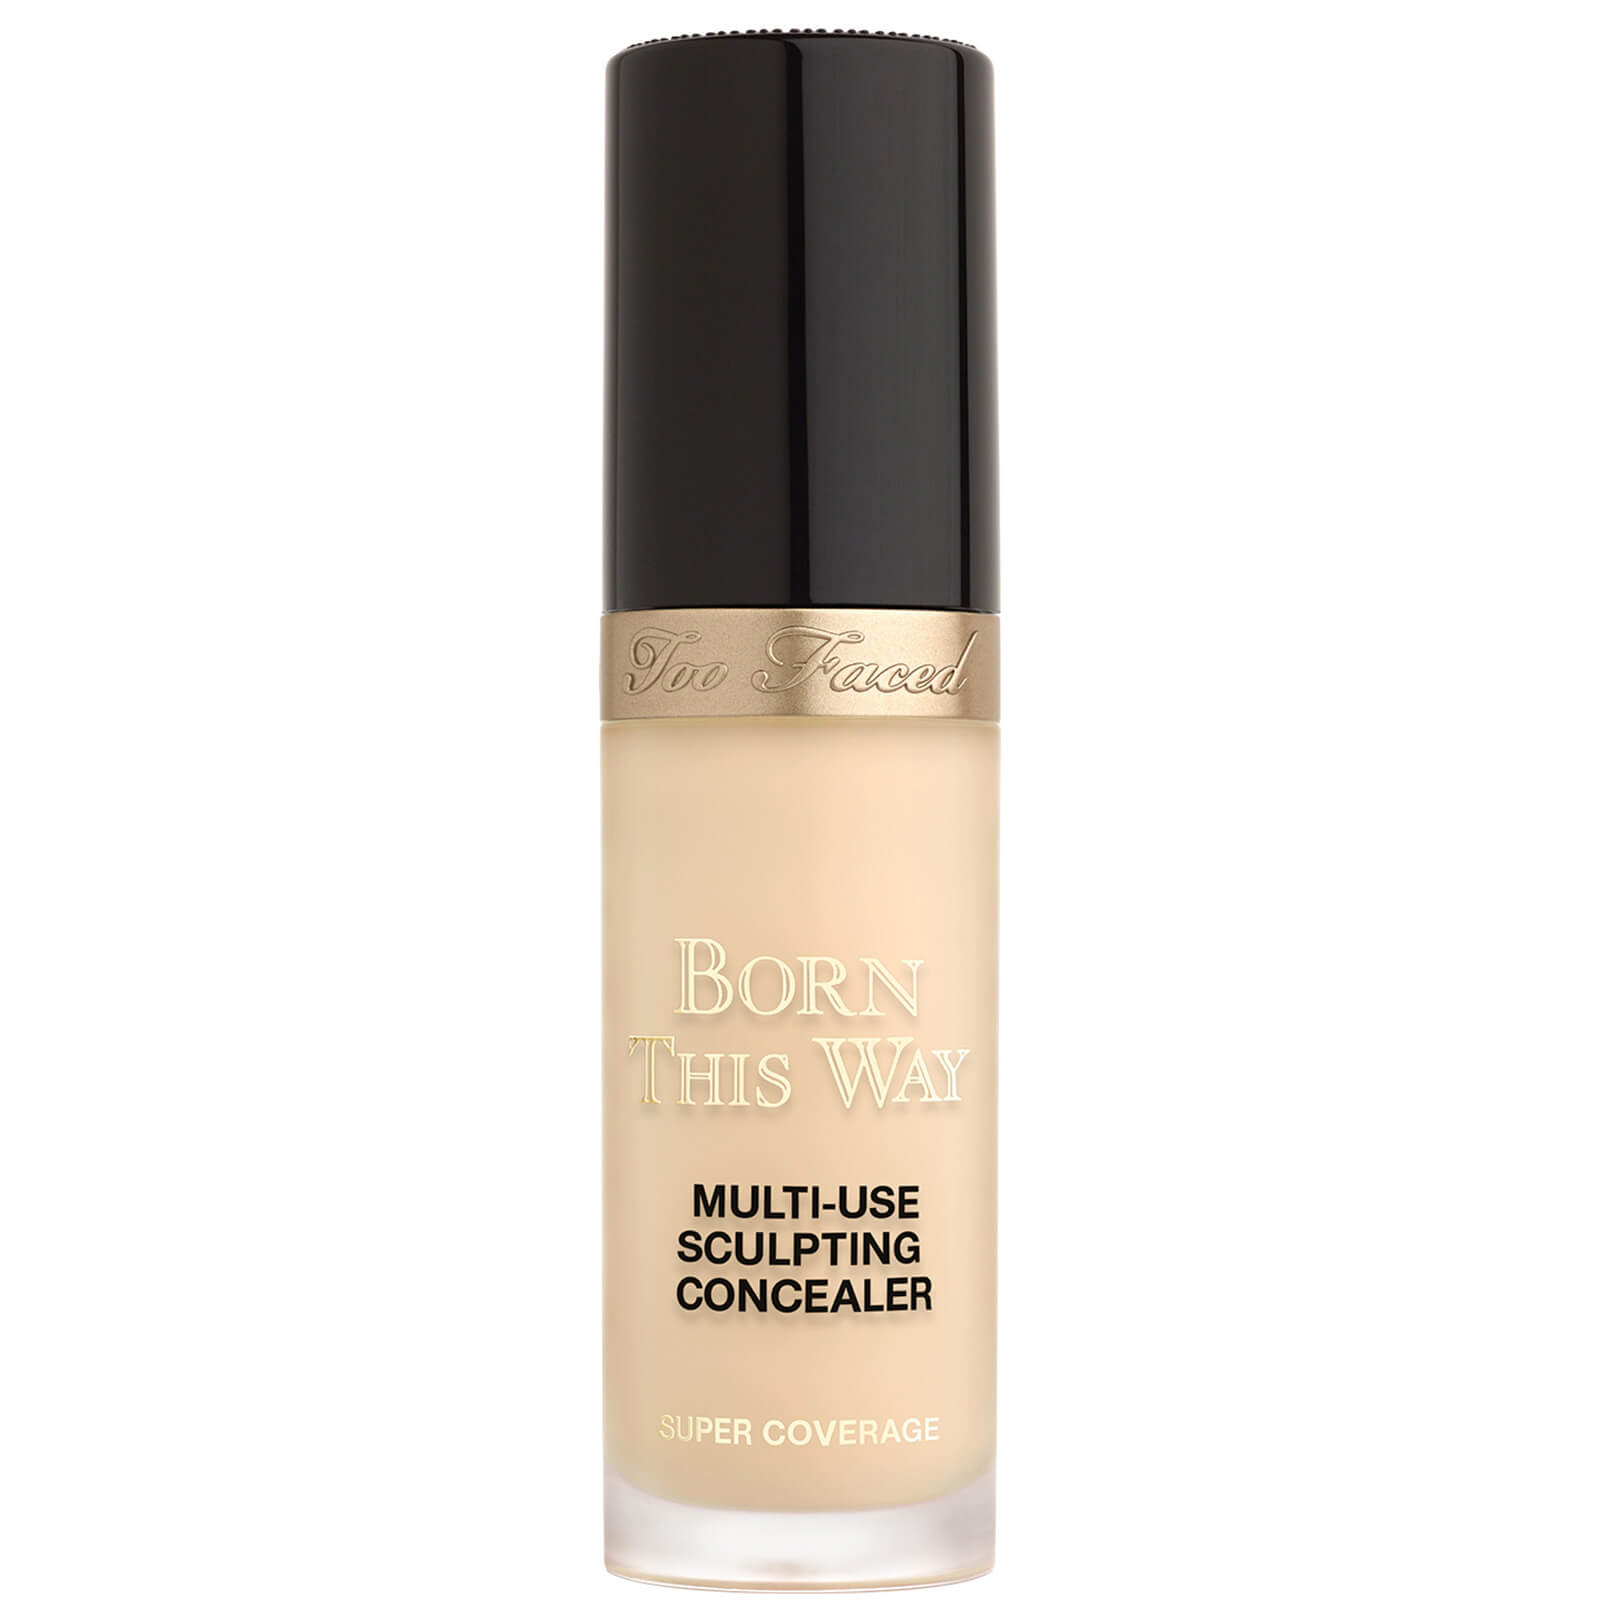 Too Faced Born This Way Super Coverage Multi-Use Concealer 13.5ml (Various Shades) - Vanilla